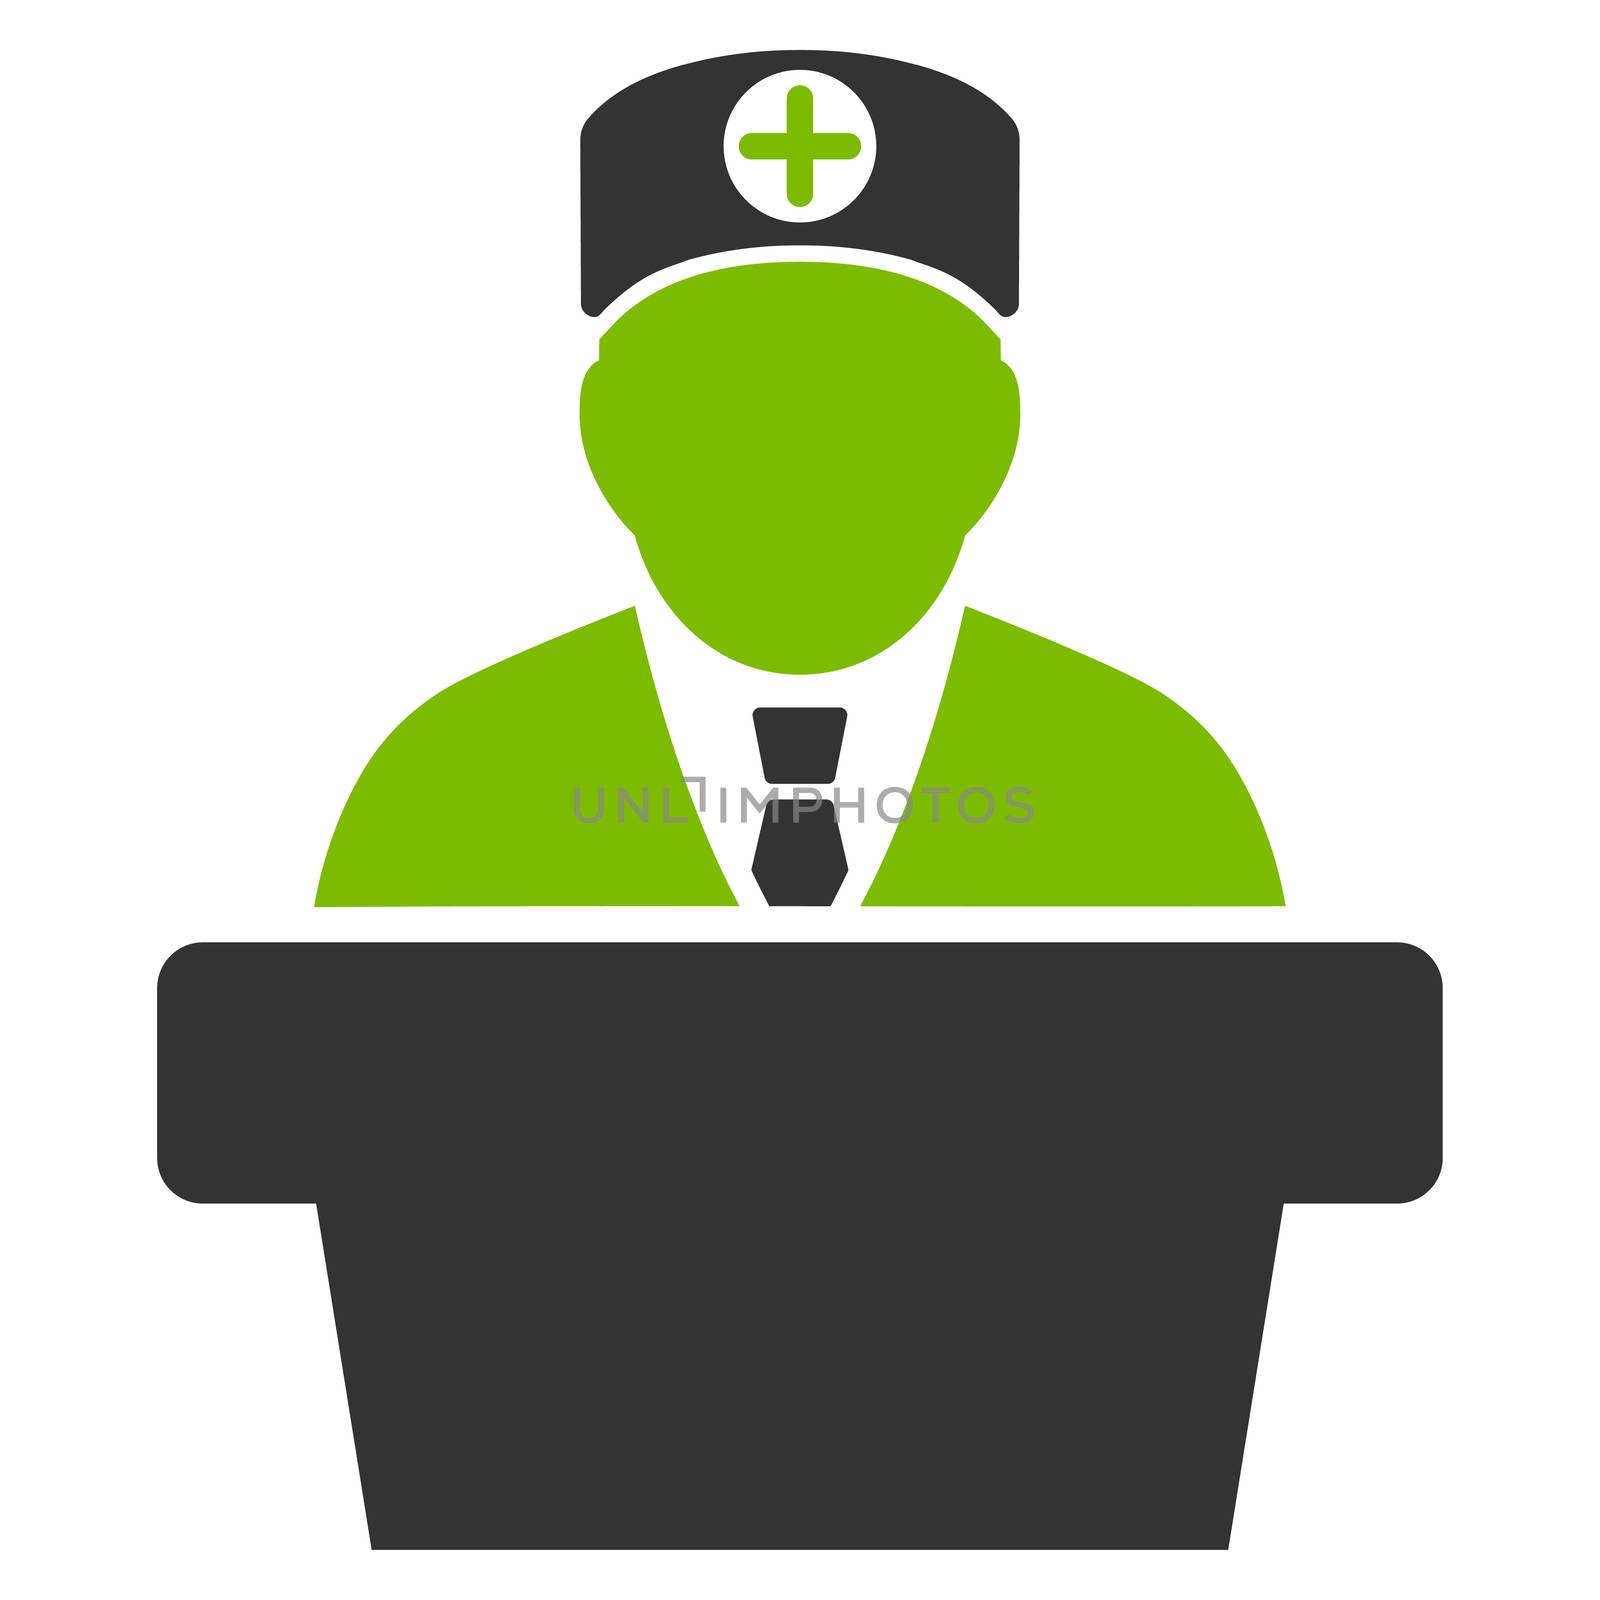 Medical Official Lecture raster icon. Style is bicolor flat symbol, eco green and gray colors, rounded angles, white background.